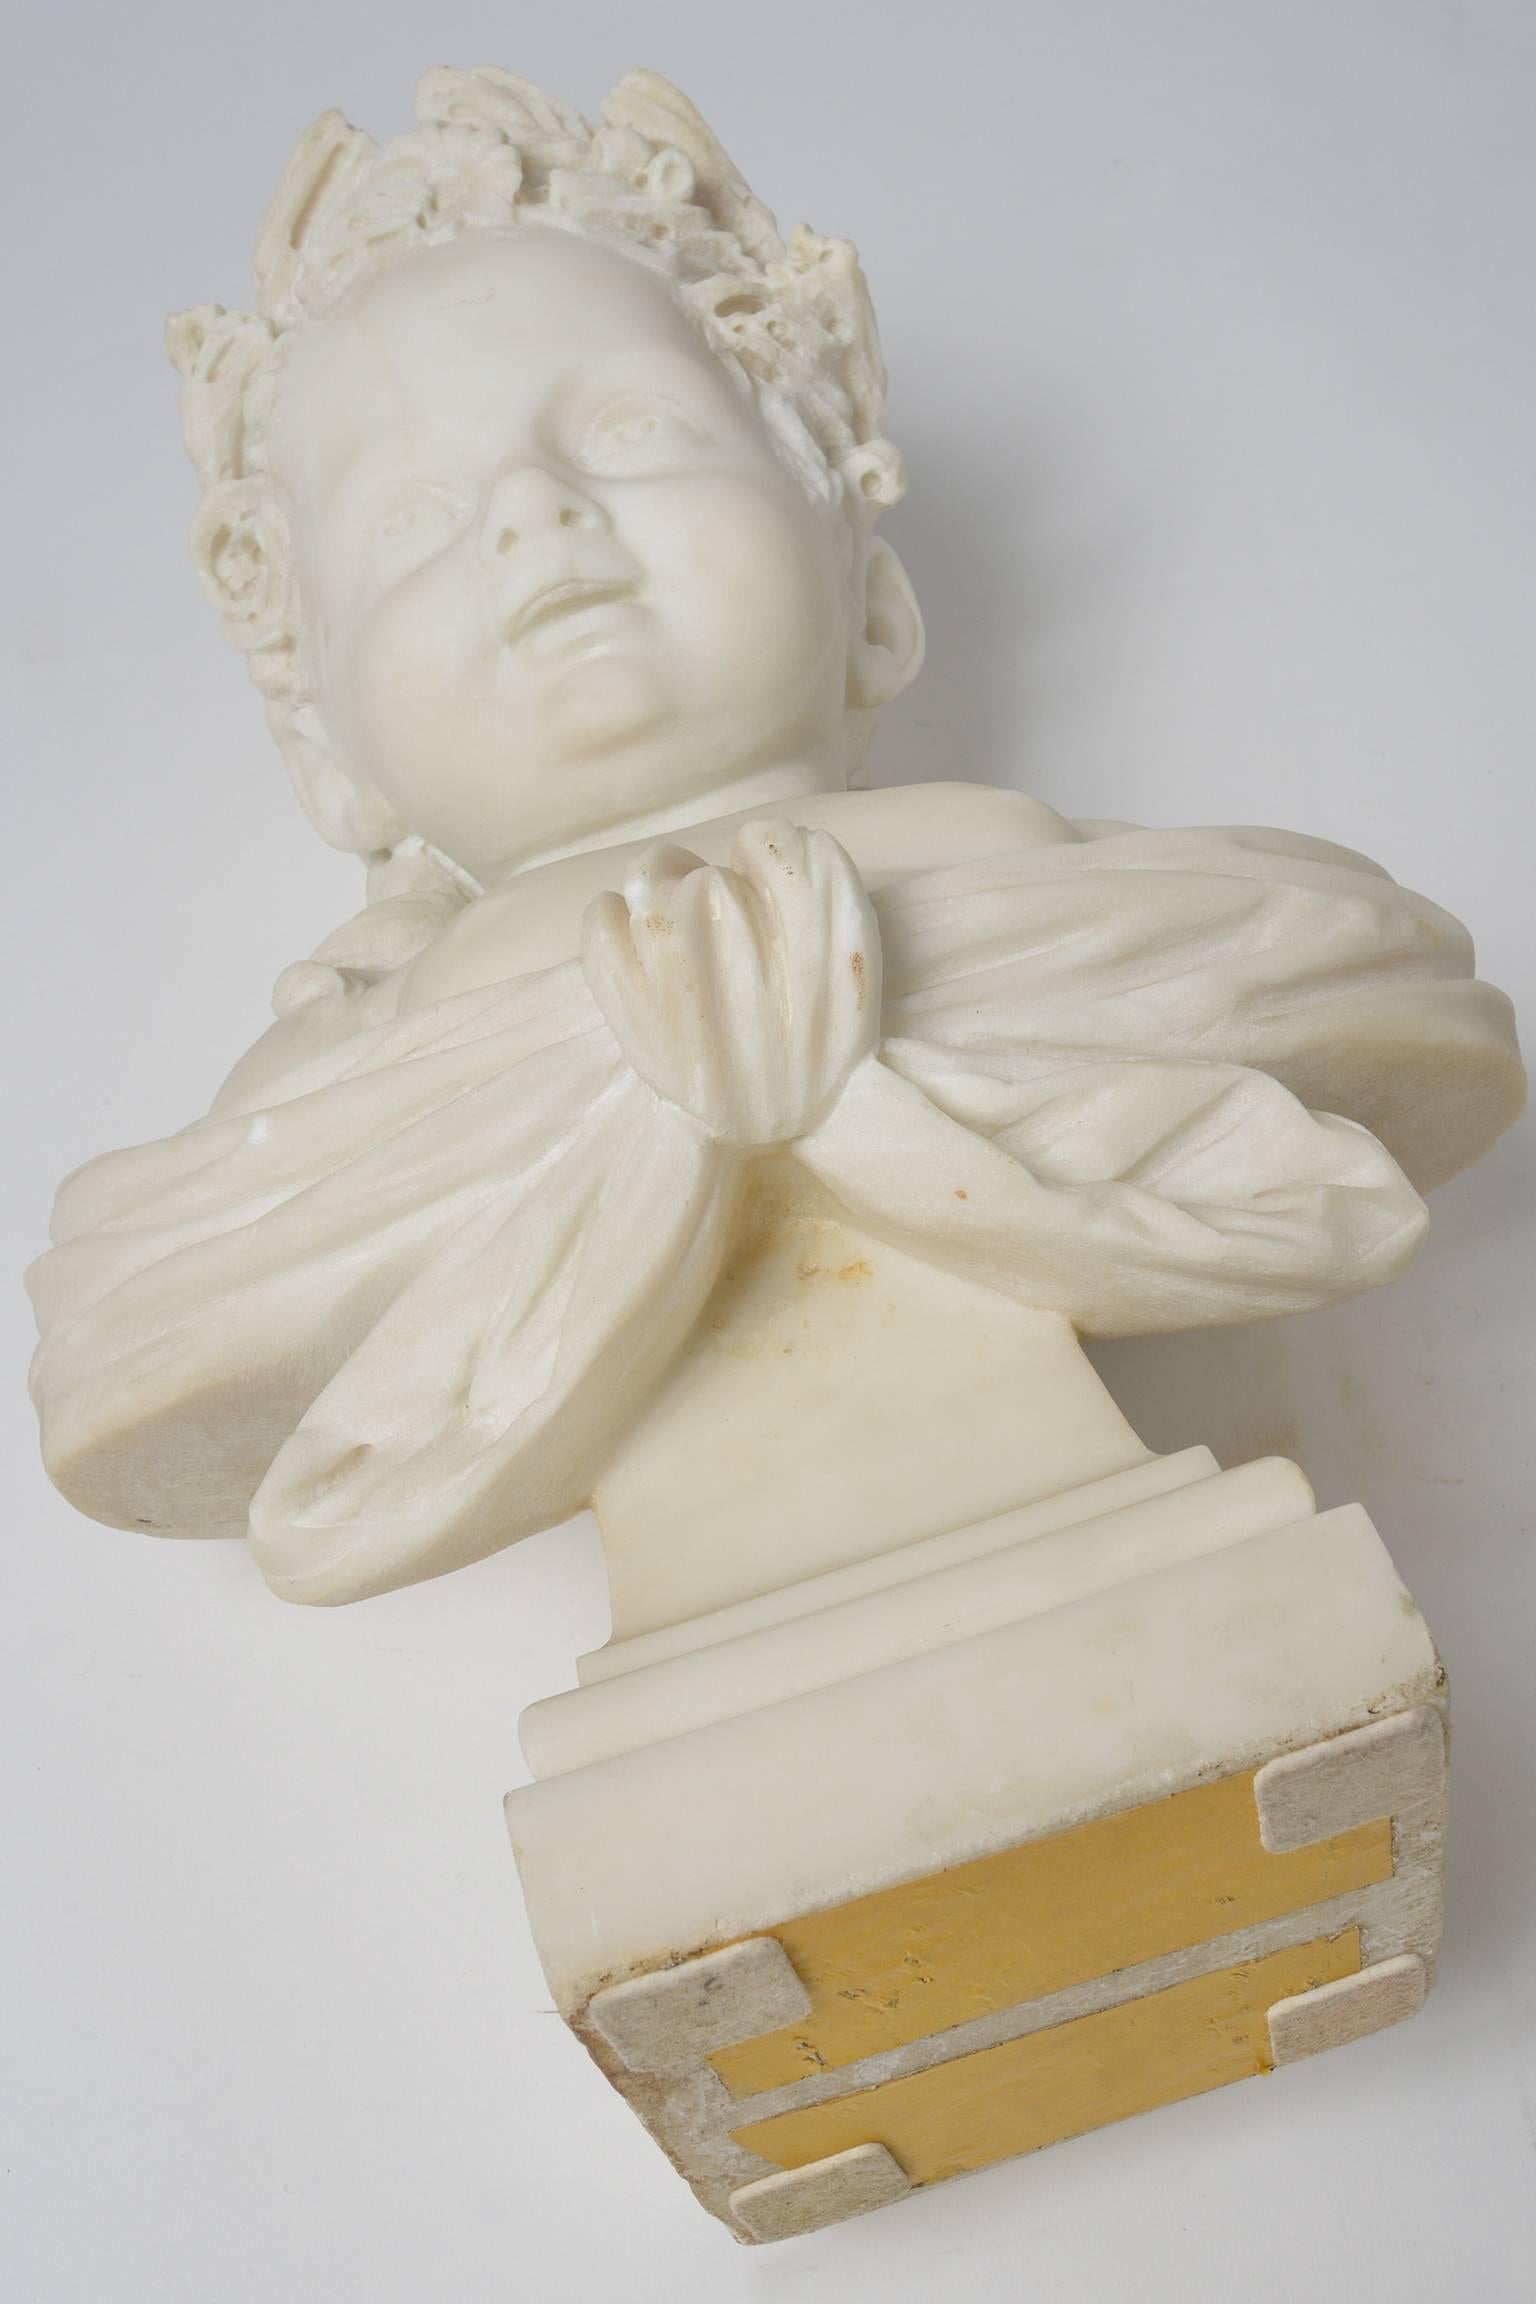 Hand-Carved White Marble Statue : Smiling Little Girl Sculpture For Sale